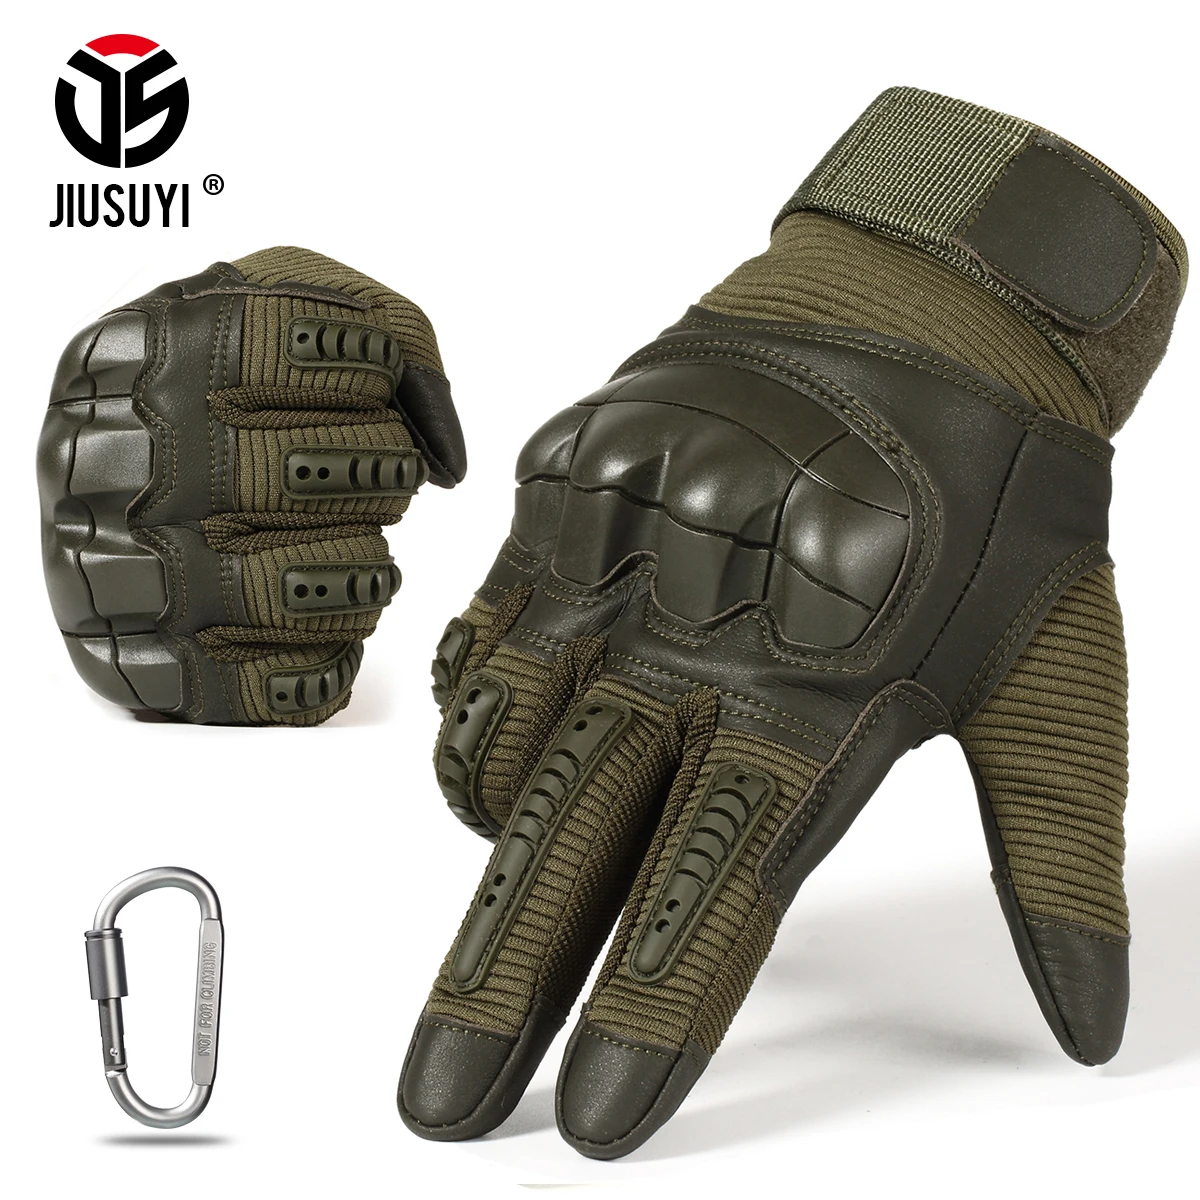 Full Finger Tactical Army Gloves Military Paintball Shooting Airsoft PU Leather Touch Screen Rubber Protective Gear Women Men 1